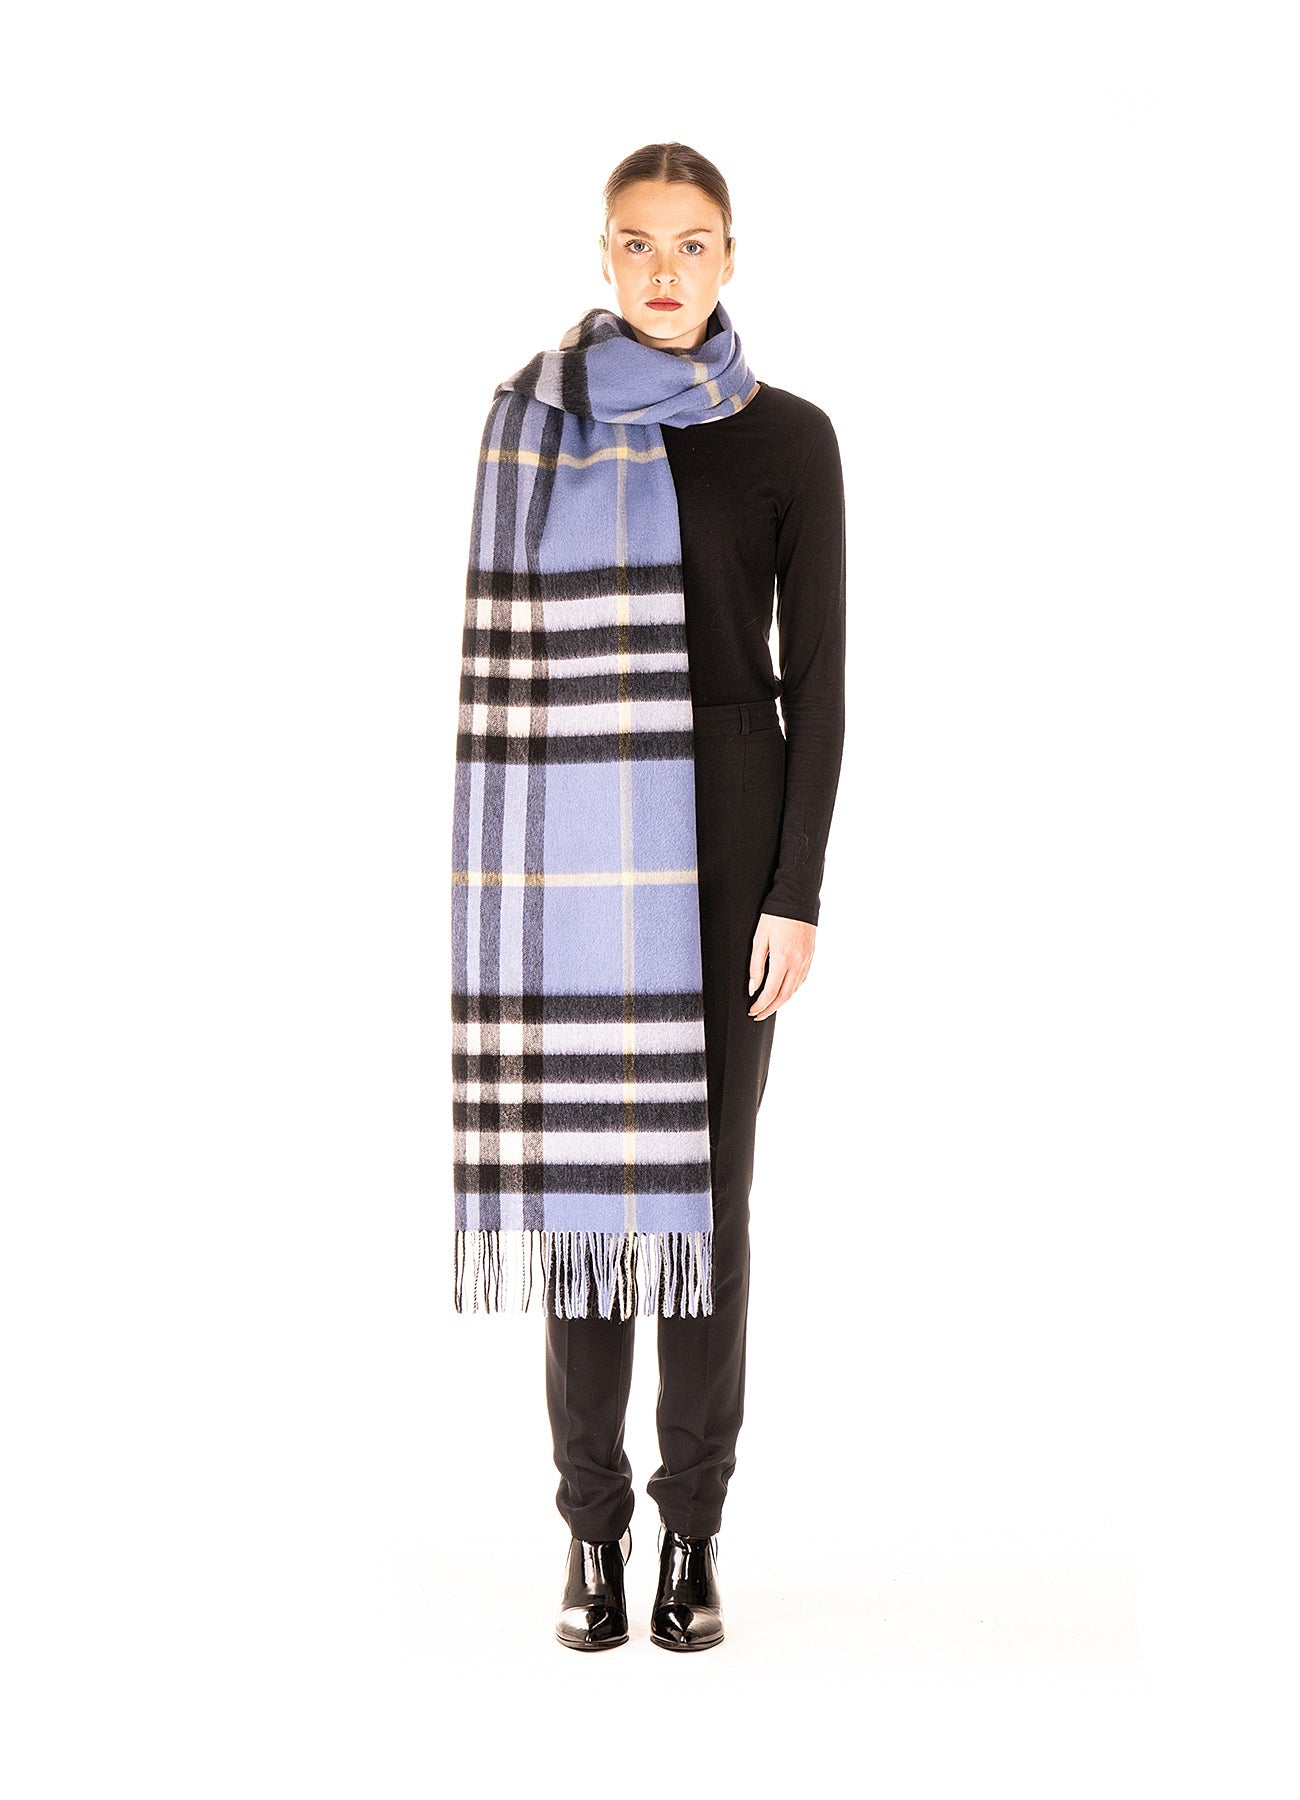 Scarf DC Check Oversized Wrap 100% Pure Lambswool